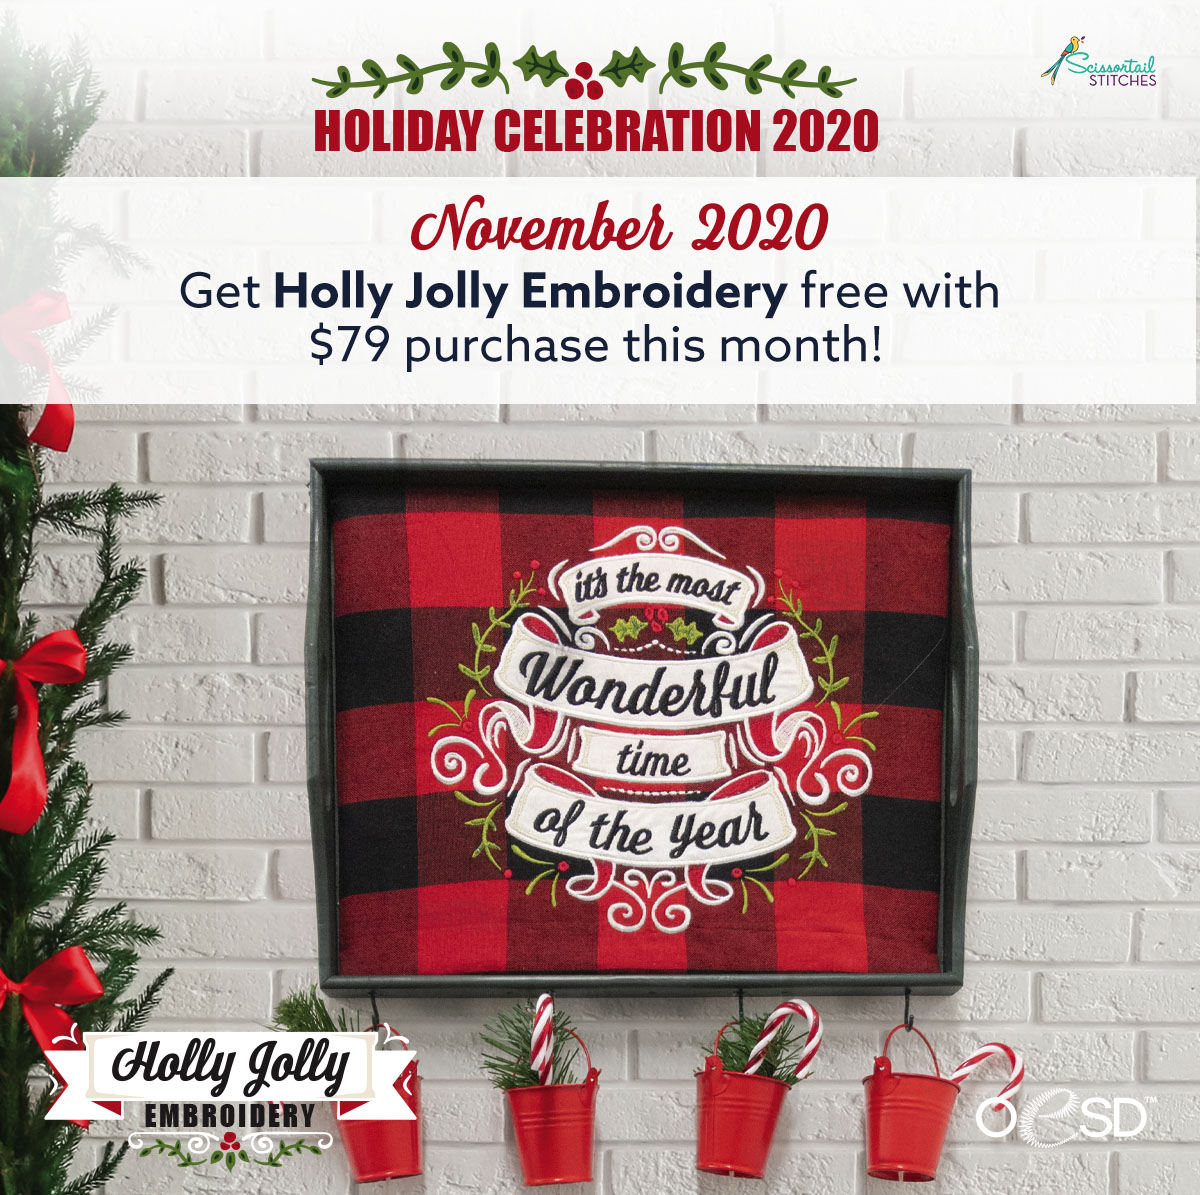 holly jolly embroidery with $79 purchase